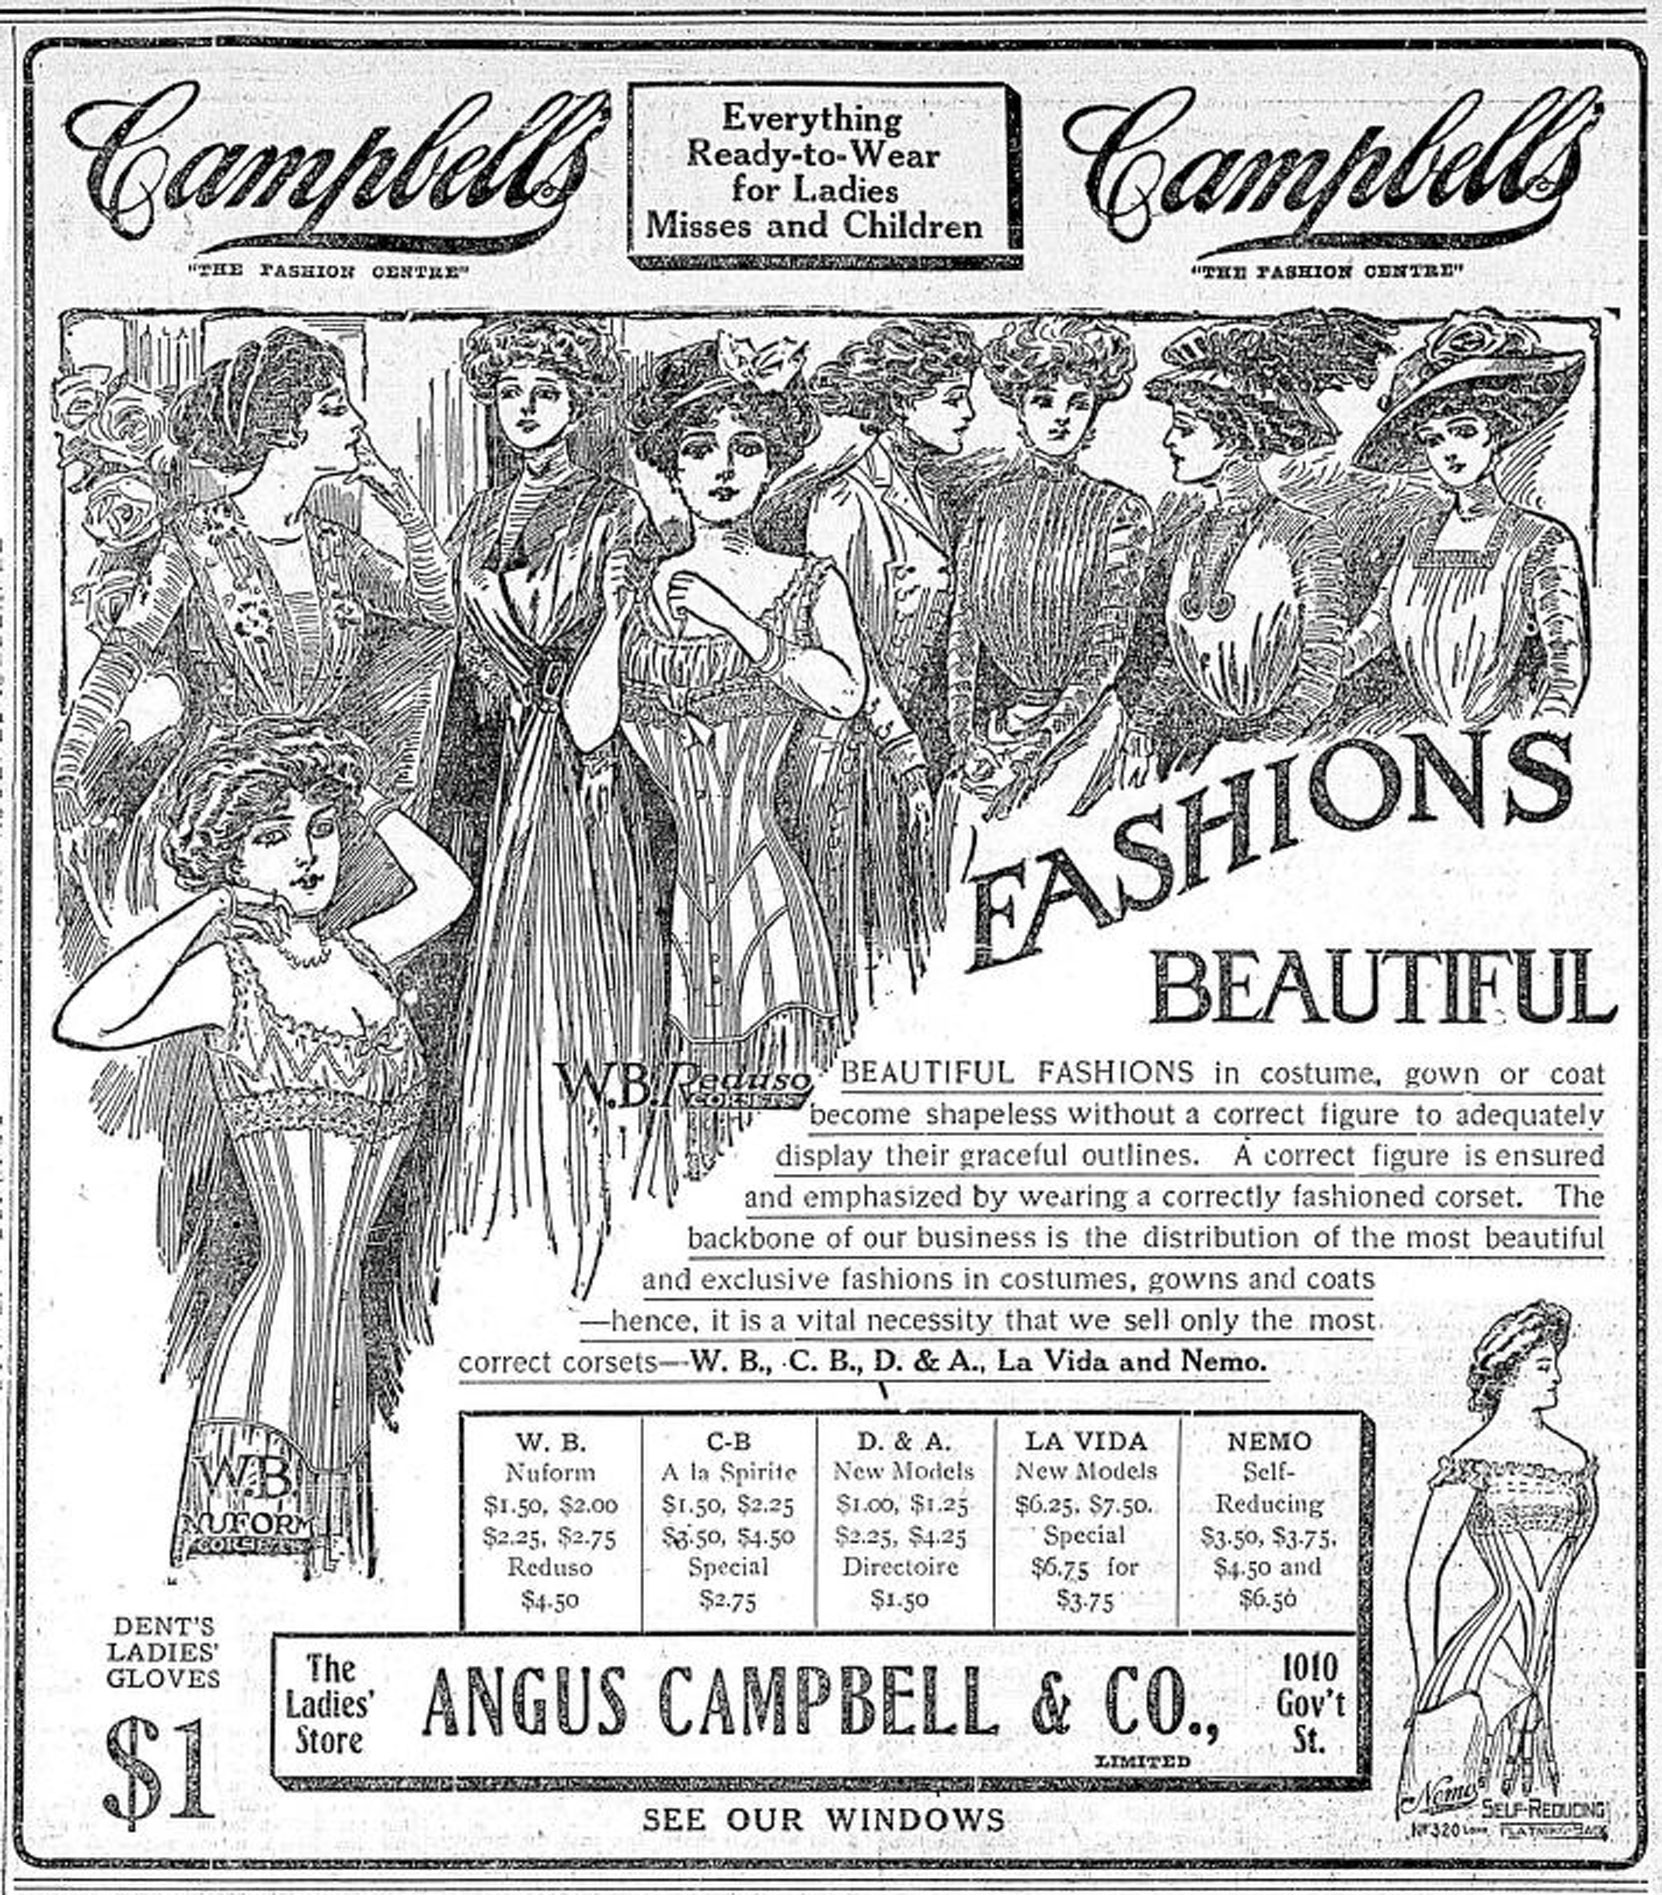 1909 advertisement for Angus Campbell & Co. Ltd., 1010 Government Street (Victoria Online Sightseeing collection)